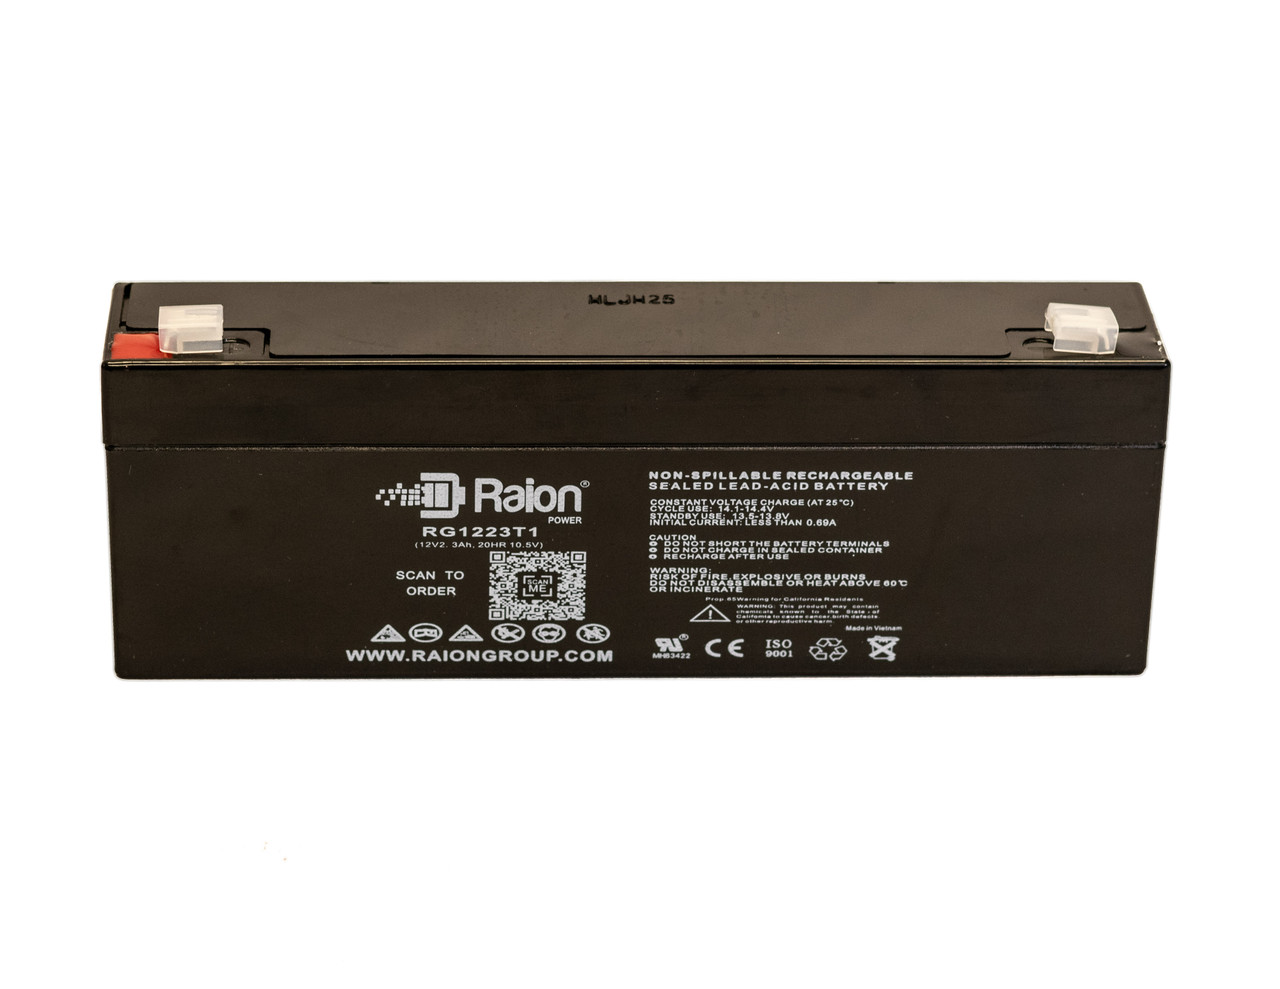 Raion Power RG1223T1 Replacement Battery Cartridge for Clary I1250VA